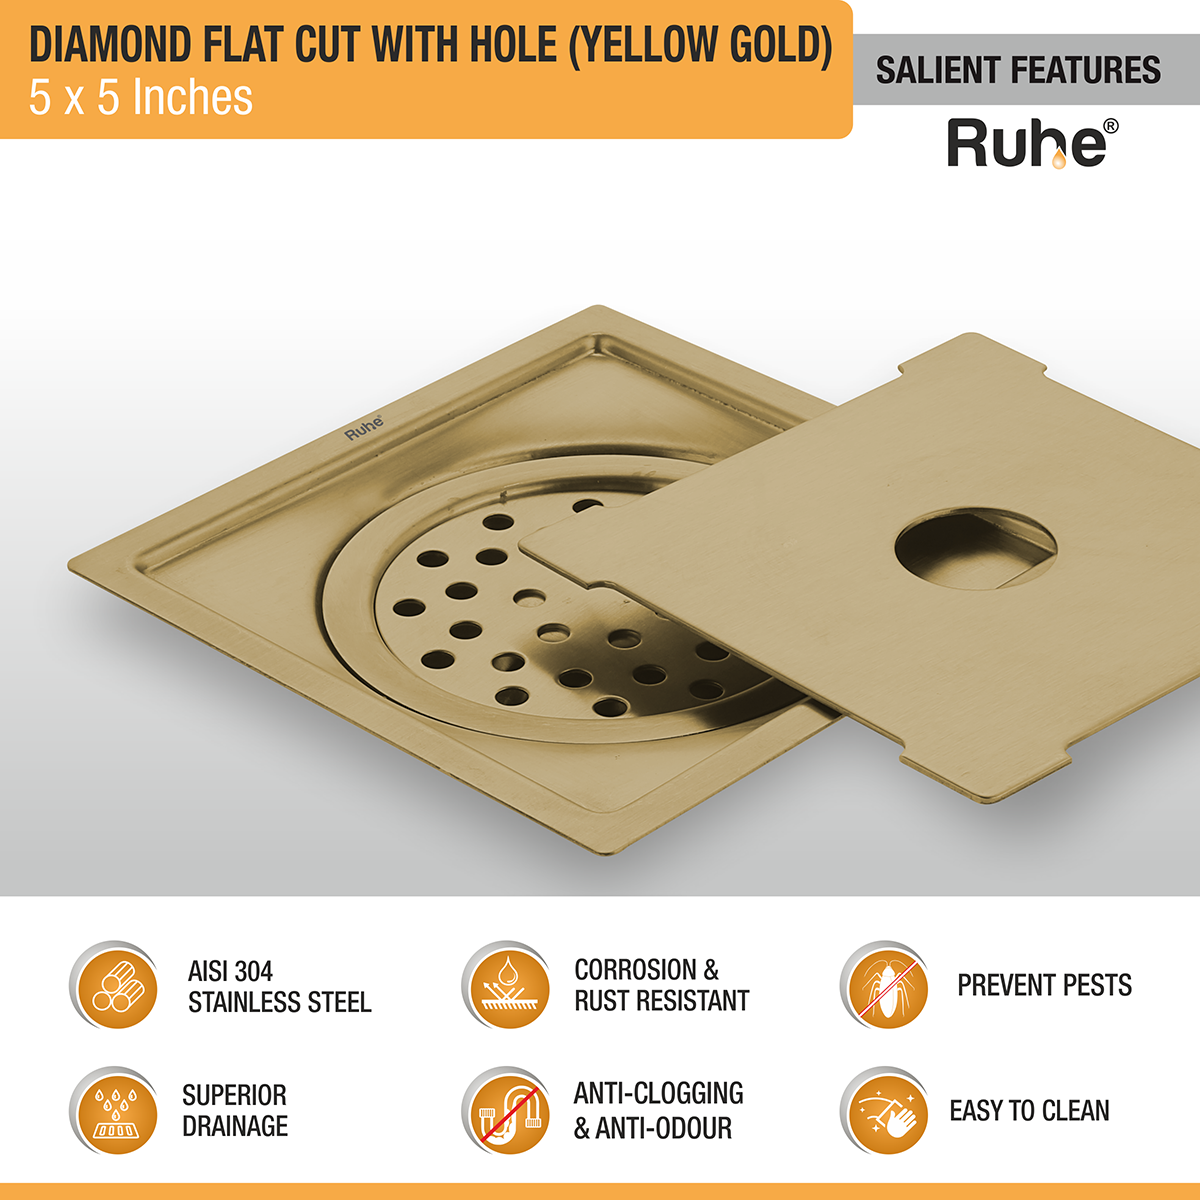 Diamond Square Flat Cut Floor Drain in Yellow Gold PVD Coating (5 x 5 Inches) with Hole features